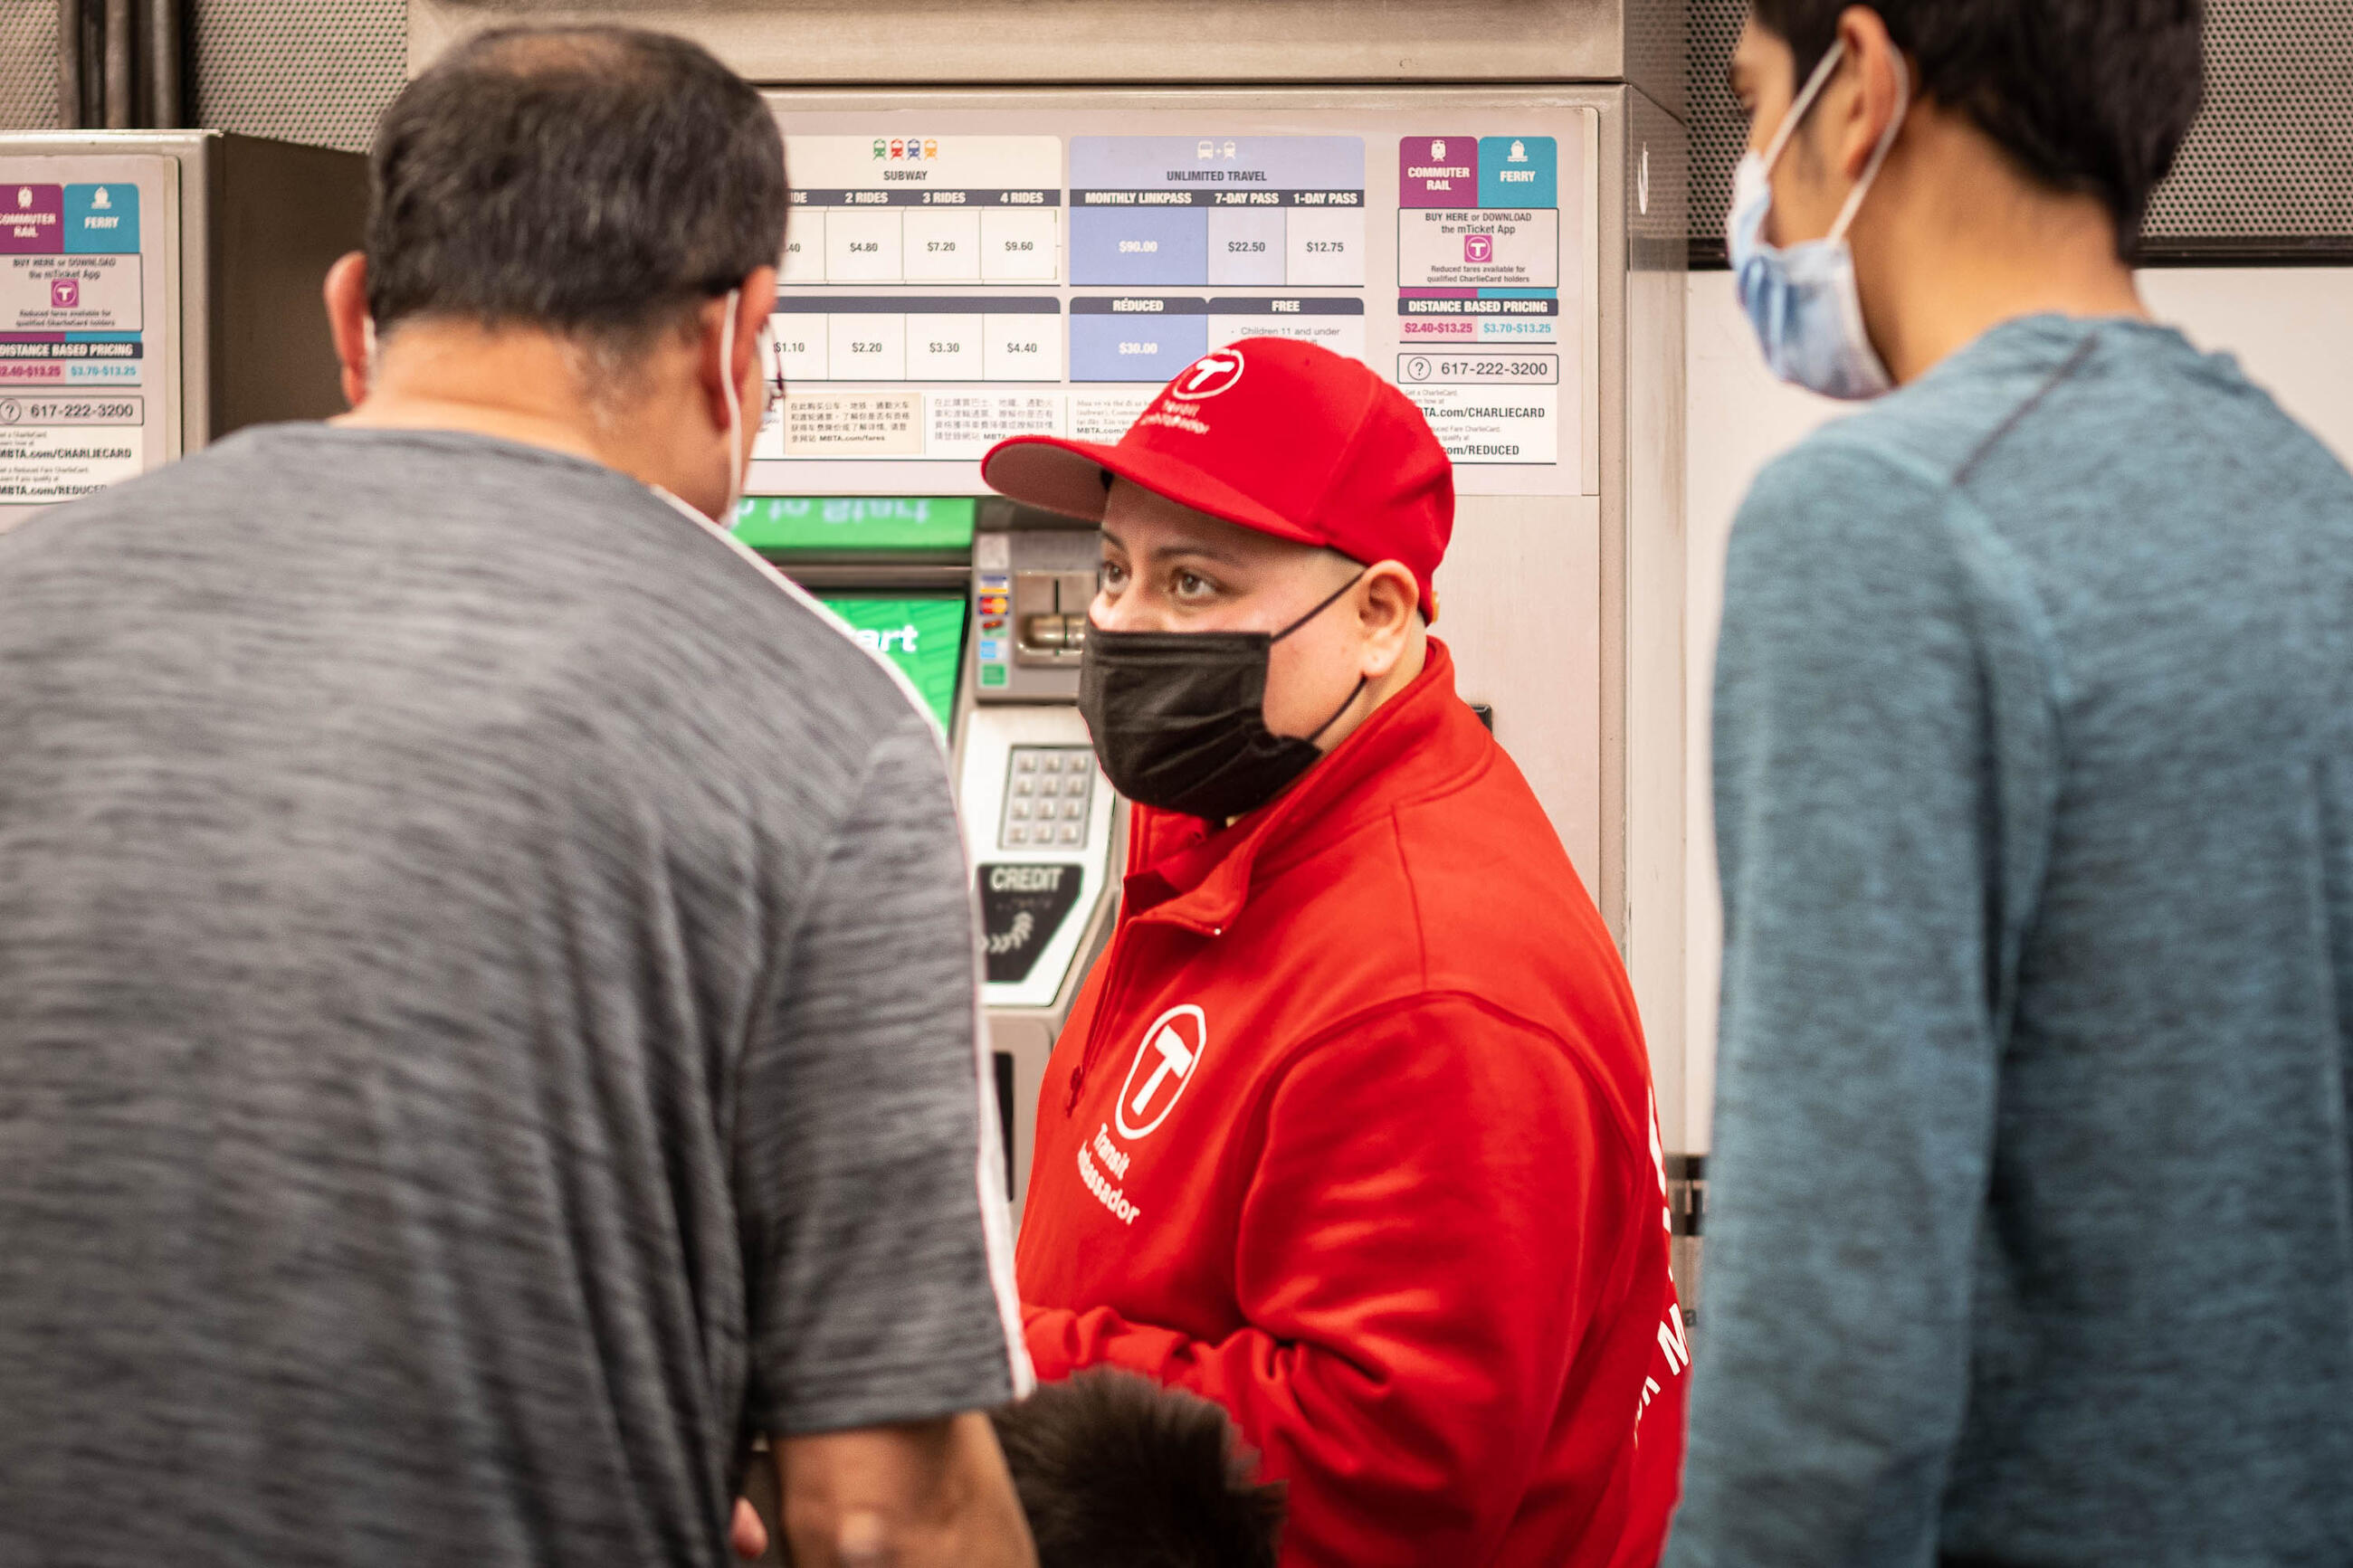 A transit ambassador in a red shirt and cap faces the camera and while two riders face away, toward the ambassador. They all stand in a station in front of fare machines. 